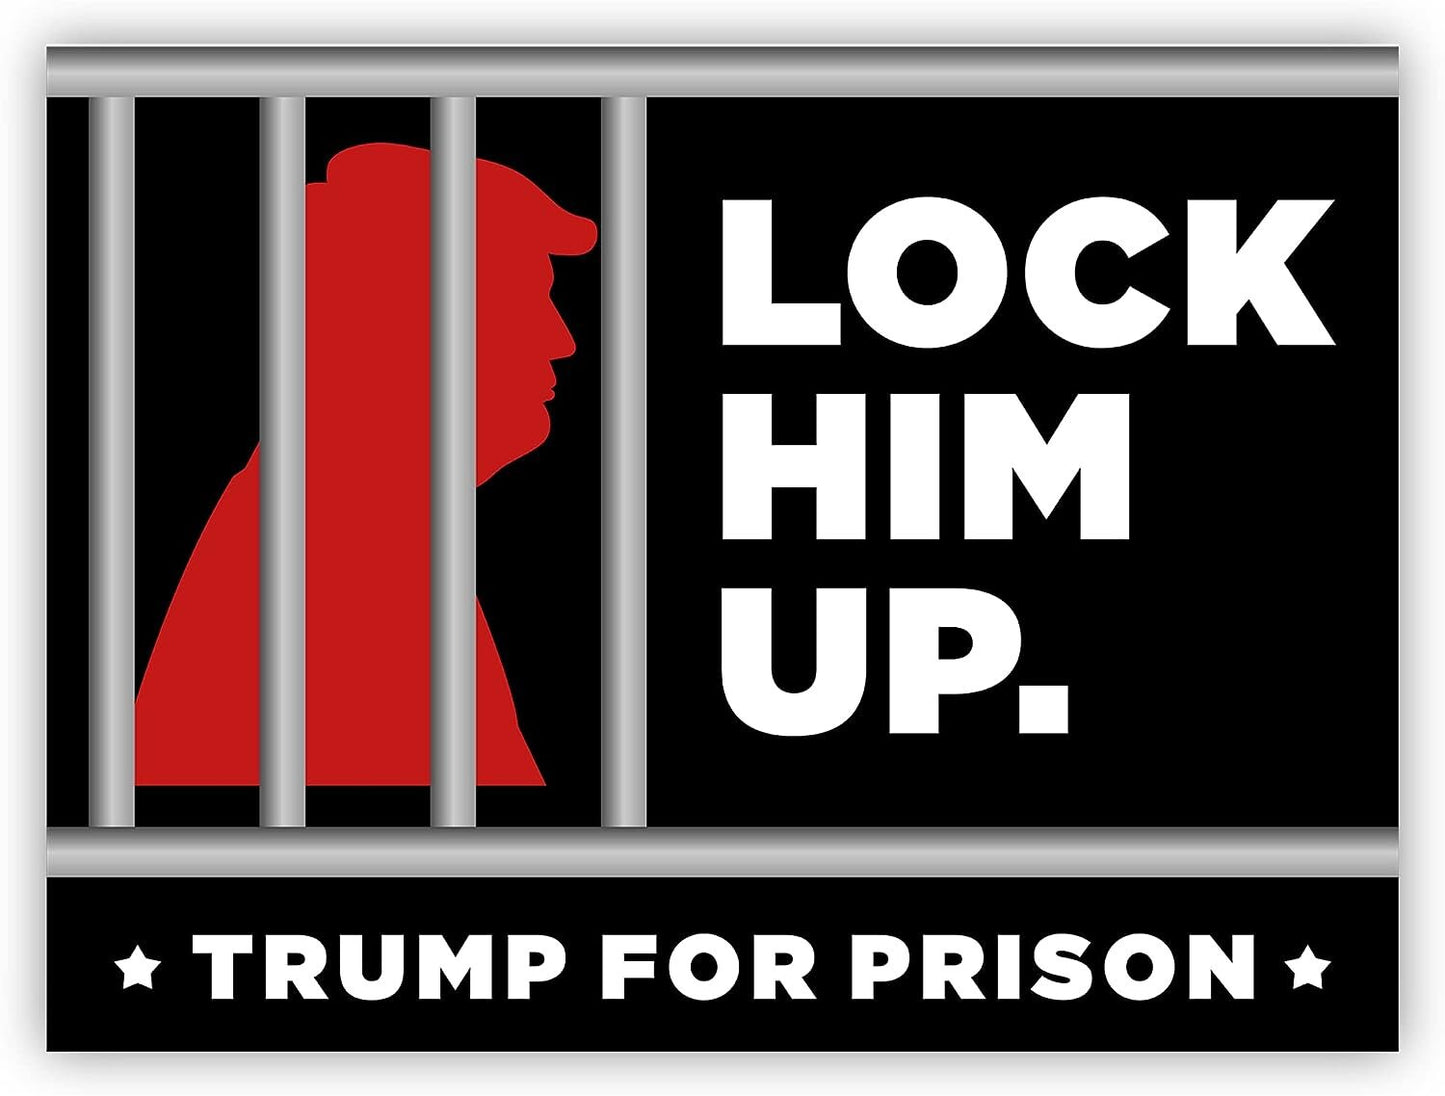 Lock Him Up Yard Sign - 18X24" with Stake - Fast Free Shipping!